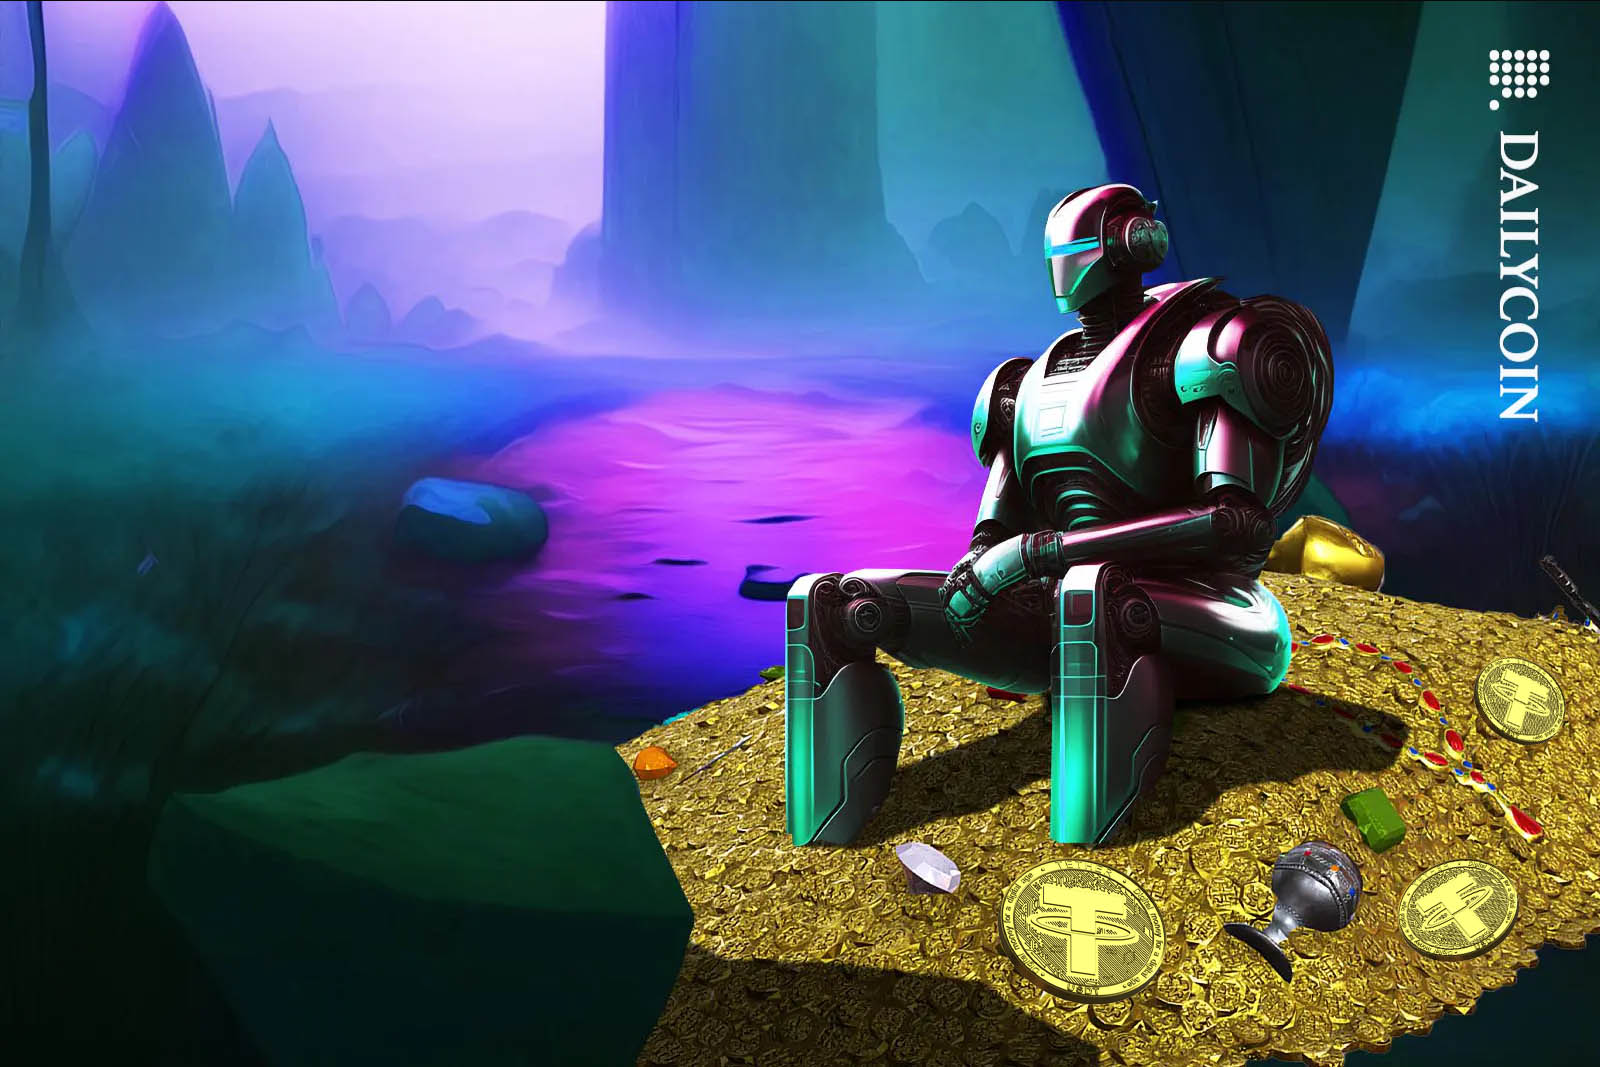 Robot sitting on a pile of gold coins and Tether USDT tokens in a swamp-like environment.